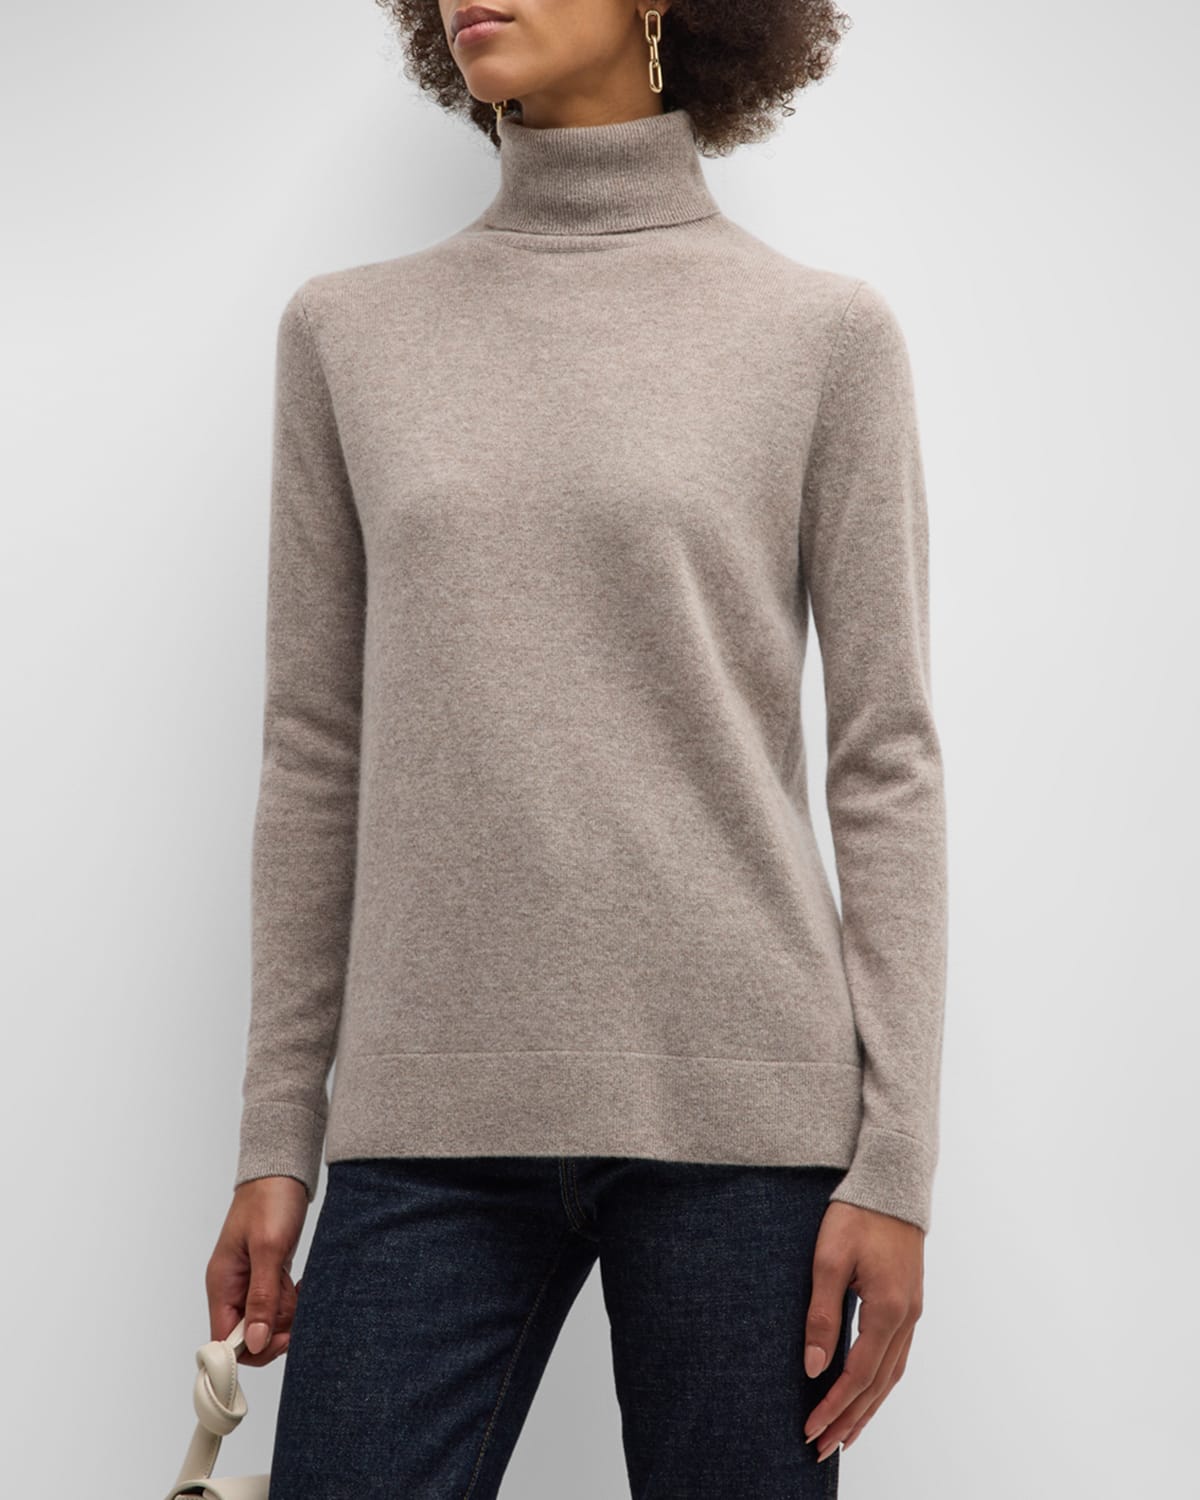 Neiman Marcus Cashmere Basic Turtleneck Top In Cafe